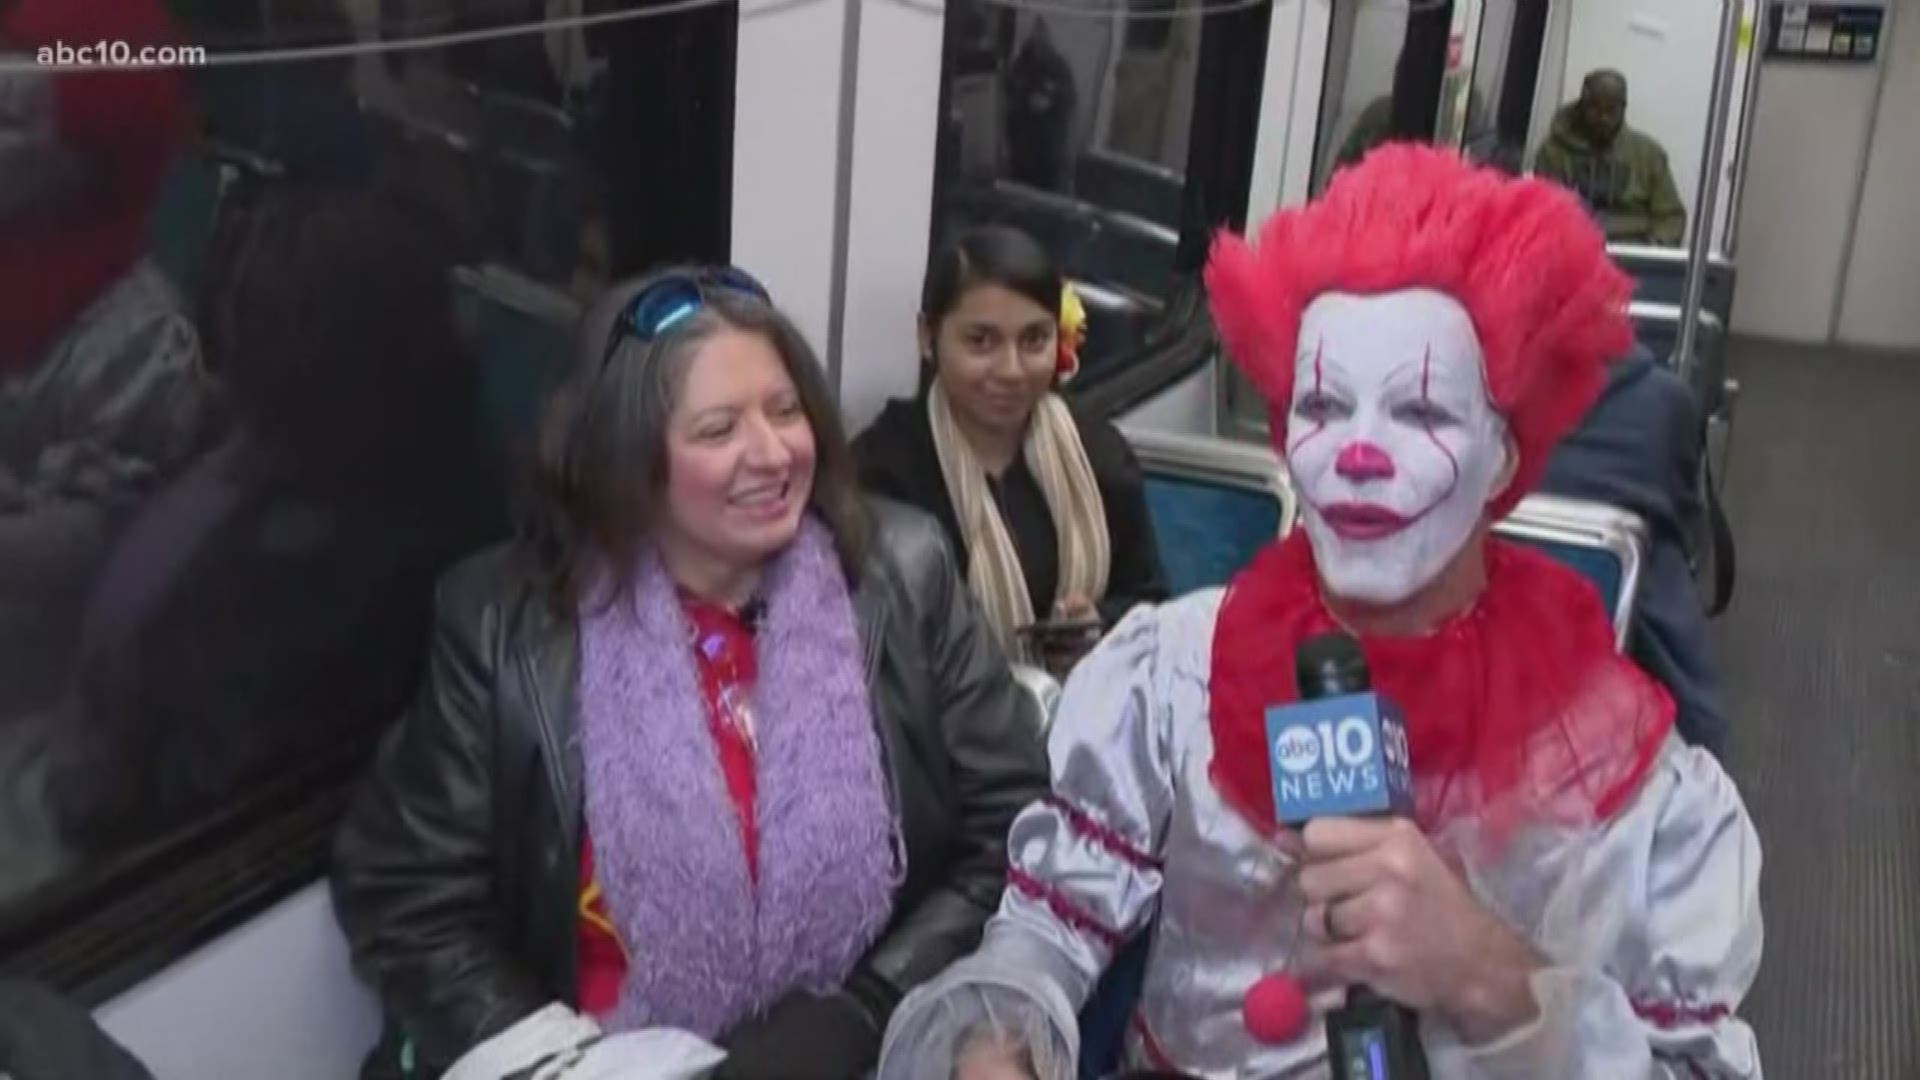 Mark S. Allen jumps on light rail in Sacramento to hand out Halloween candy, laughs and scares.